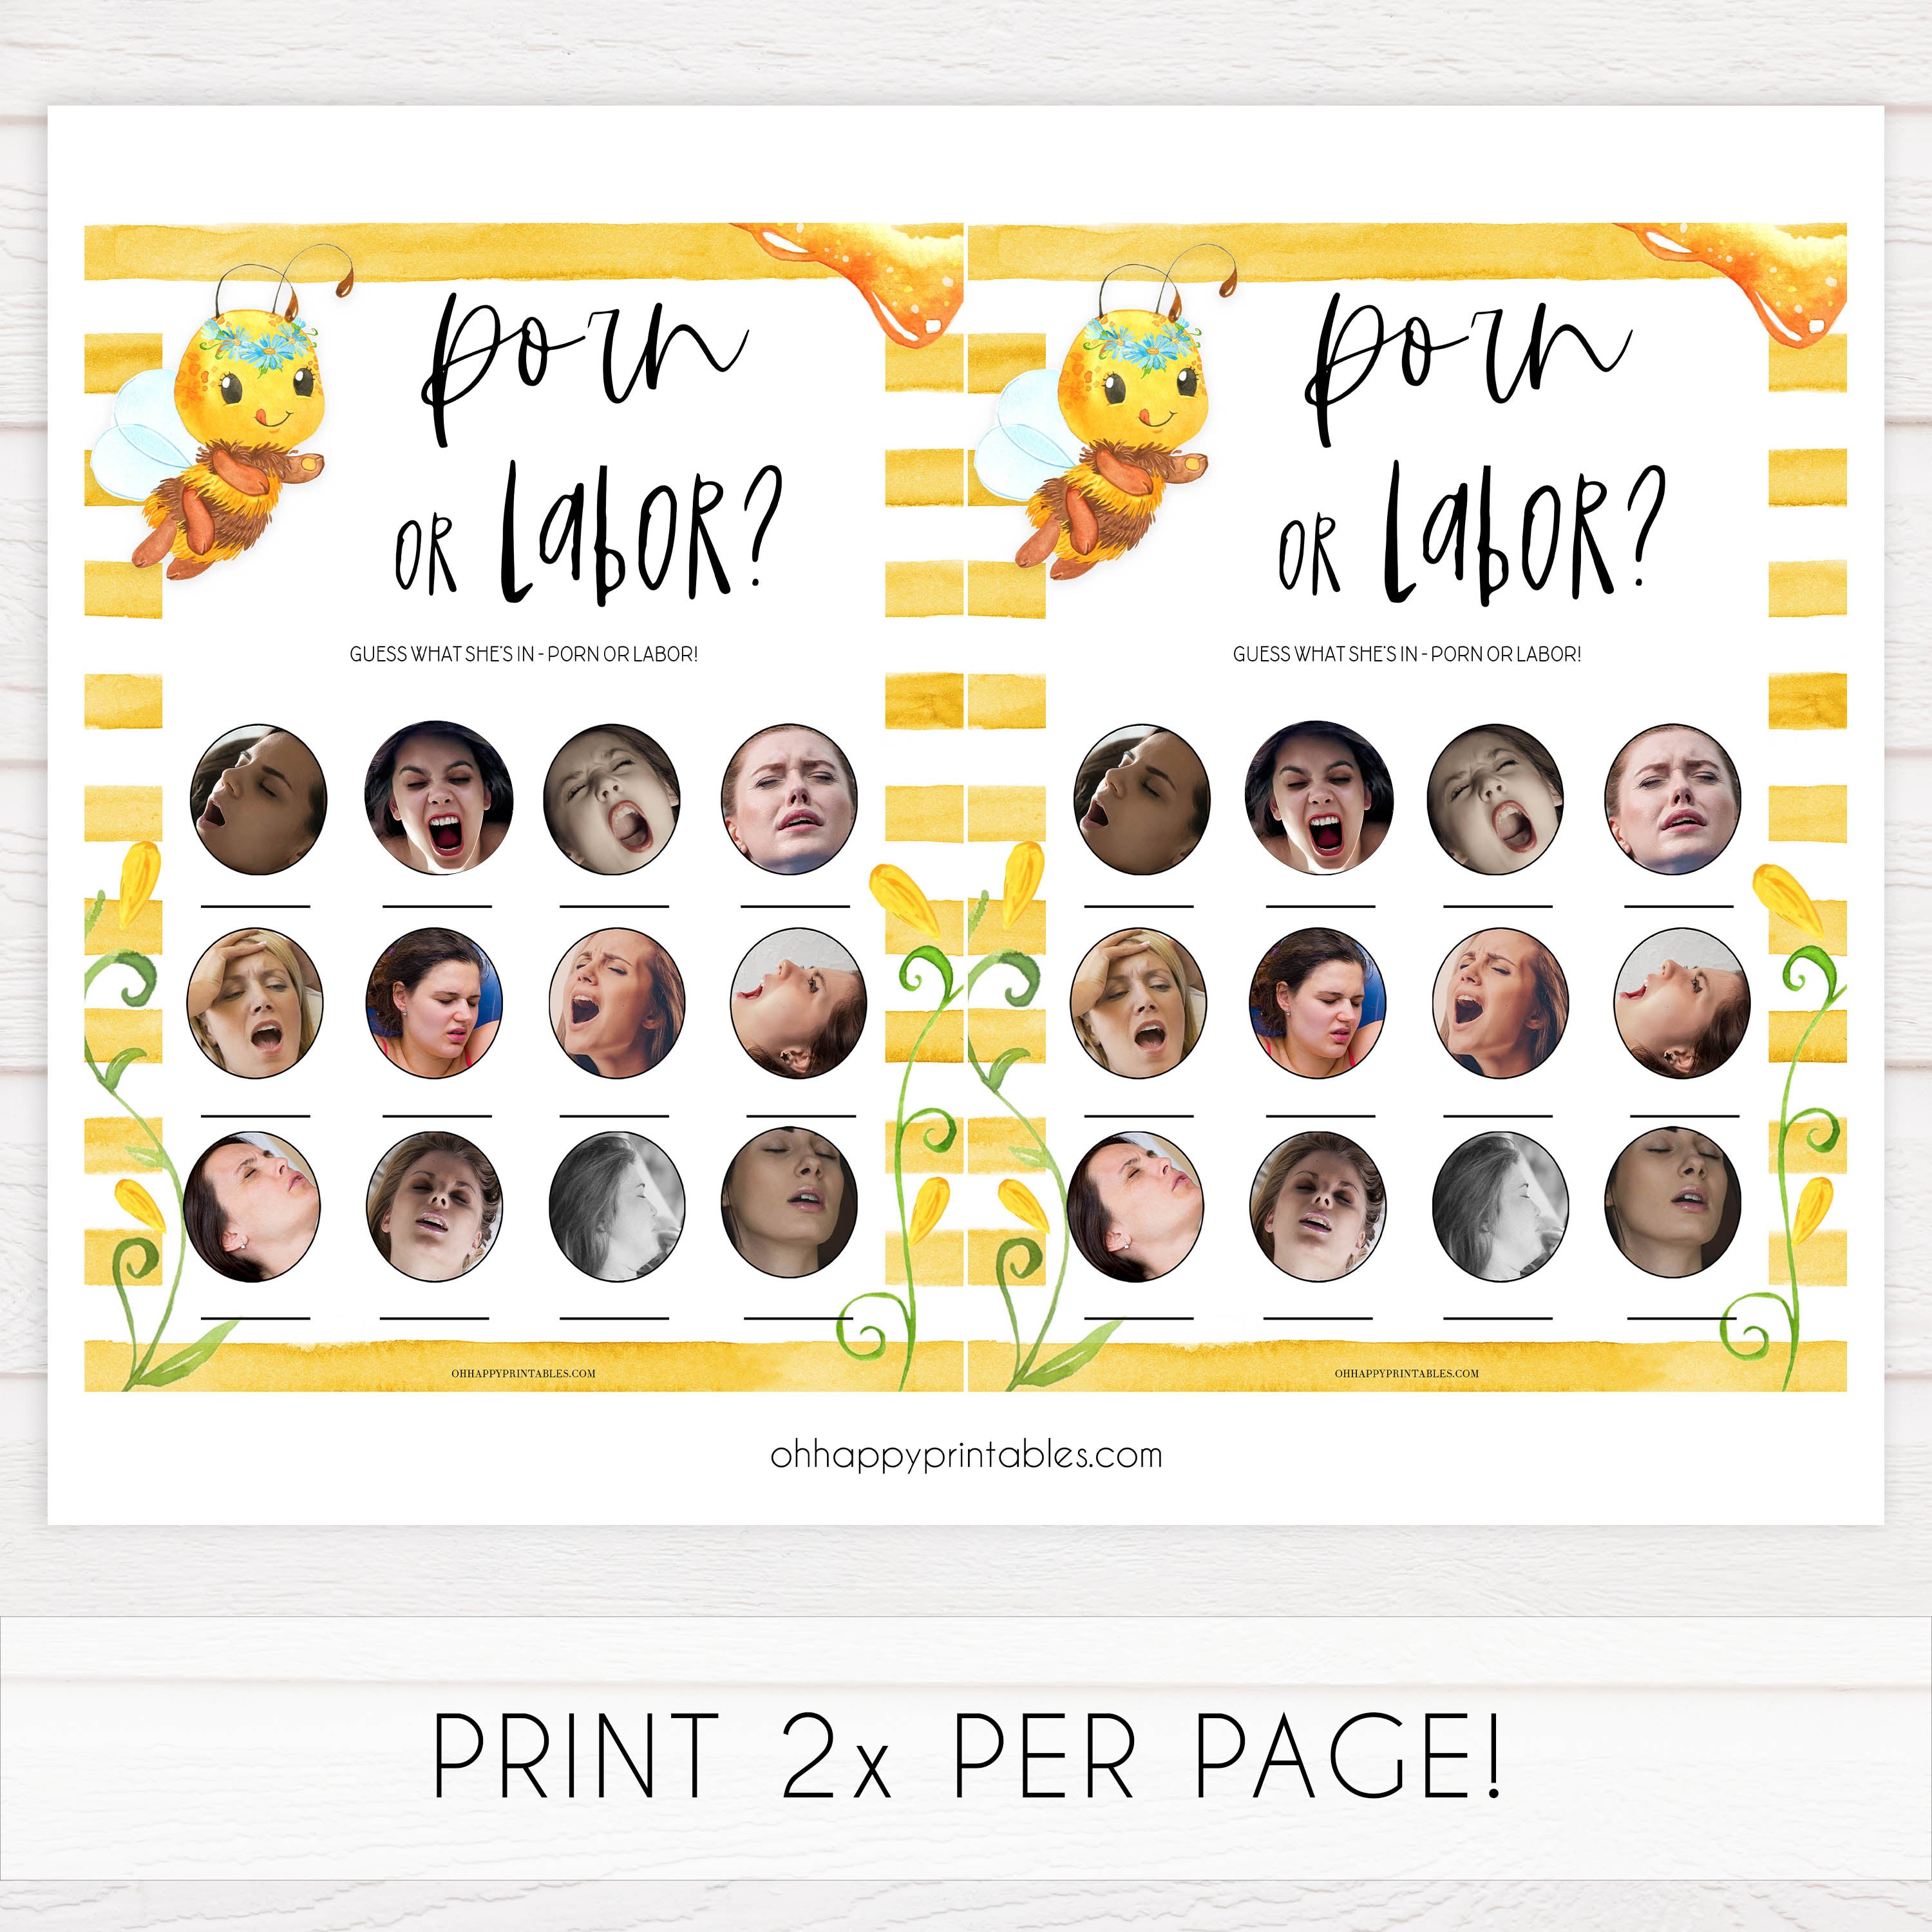 labor or porn baby game, labor porn game, Printable baby shower games, mommy bee fun baby games, baby shower games, fun baby shower ideas, top baby shower ideas, mommy to bee baby shower, friends baby shower ideas